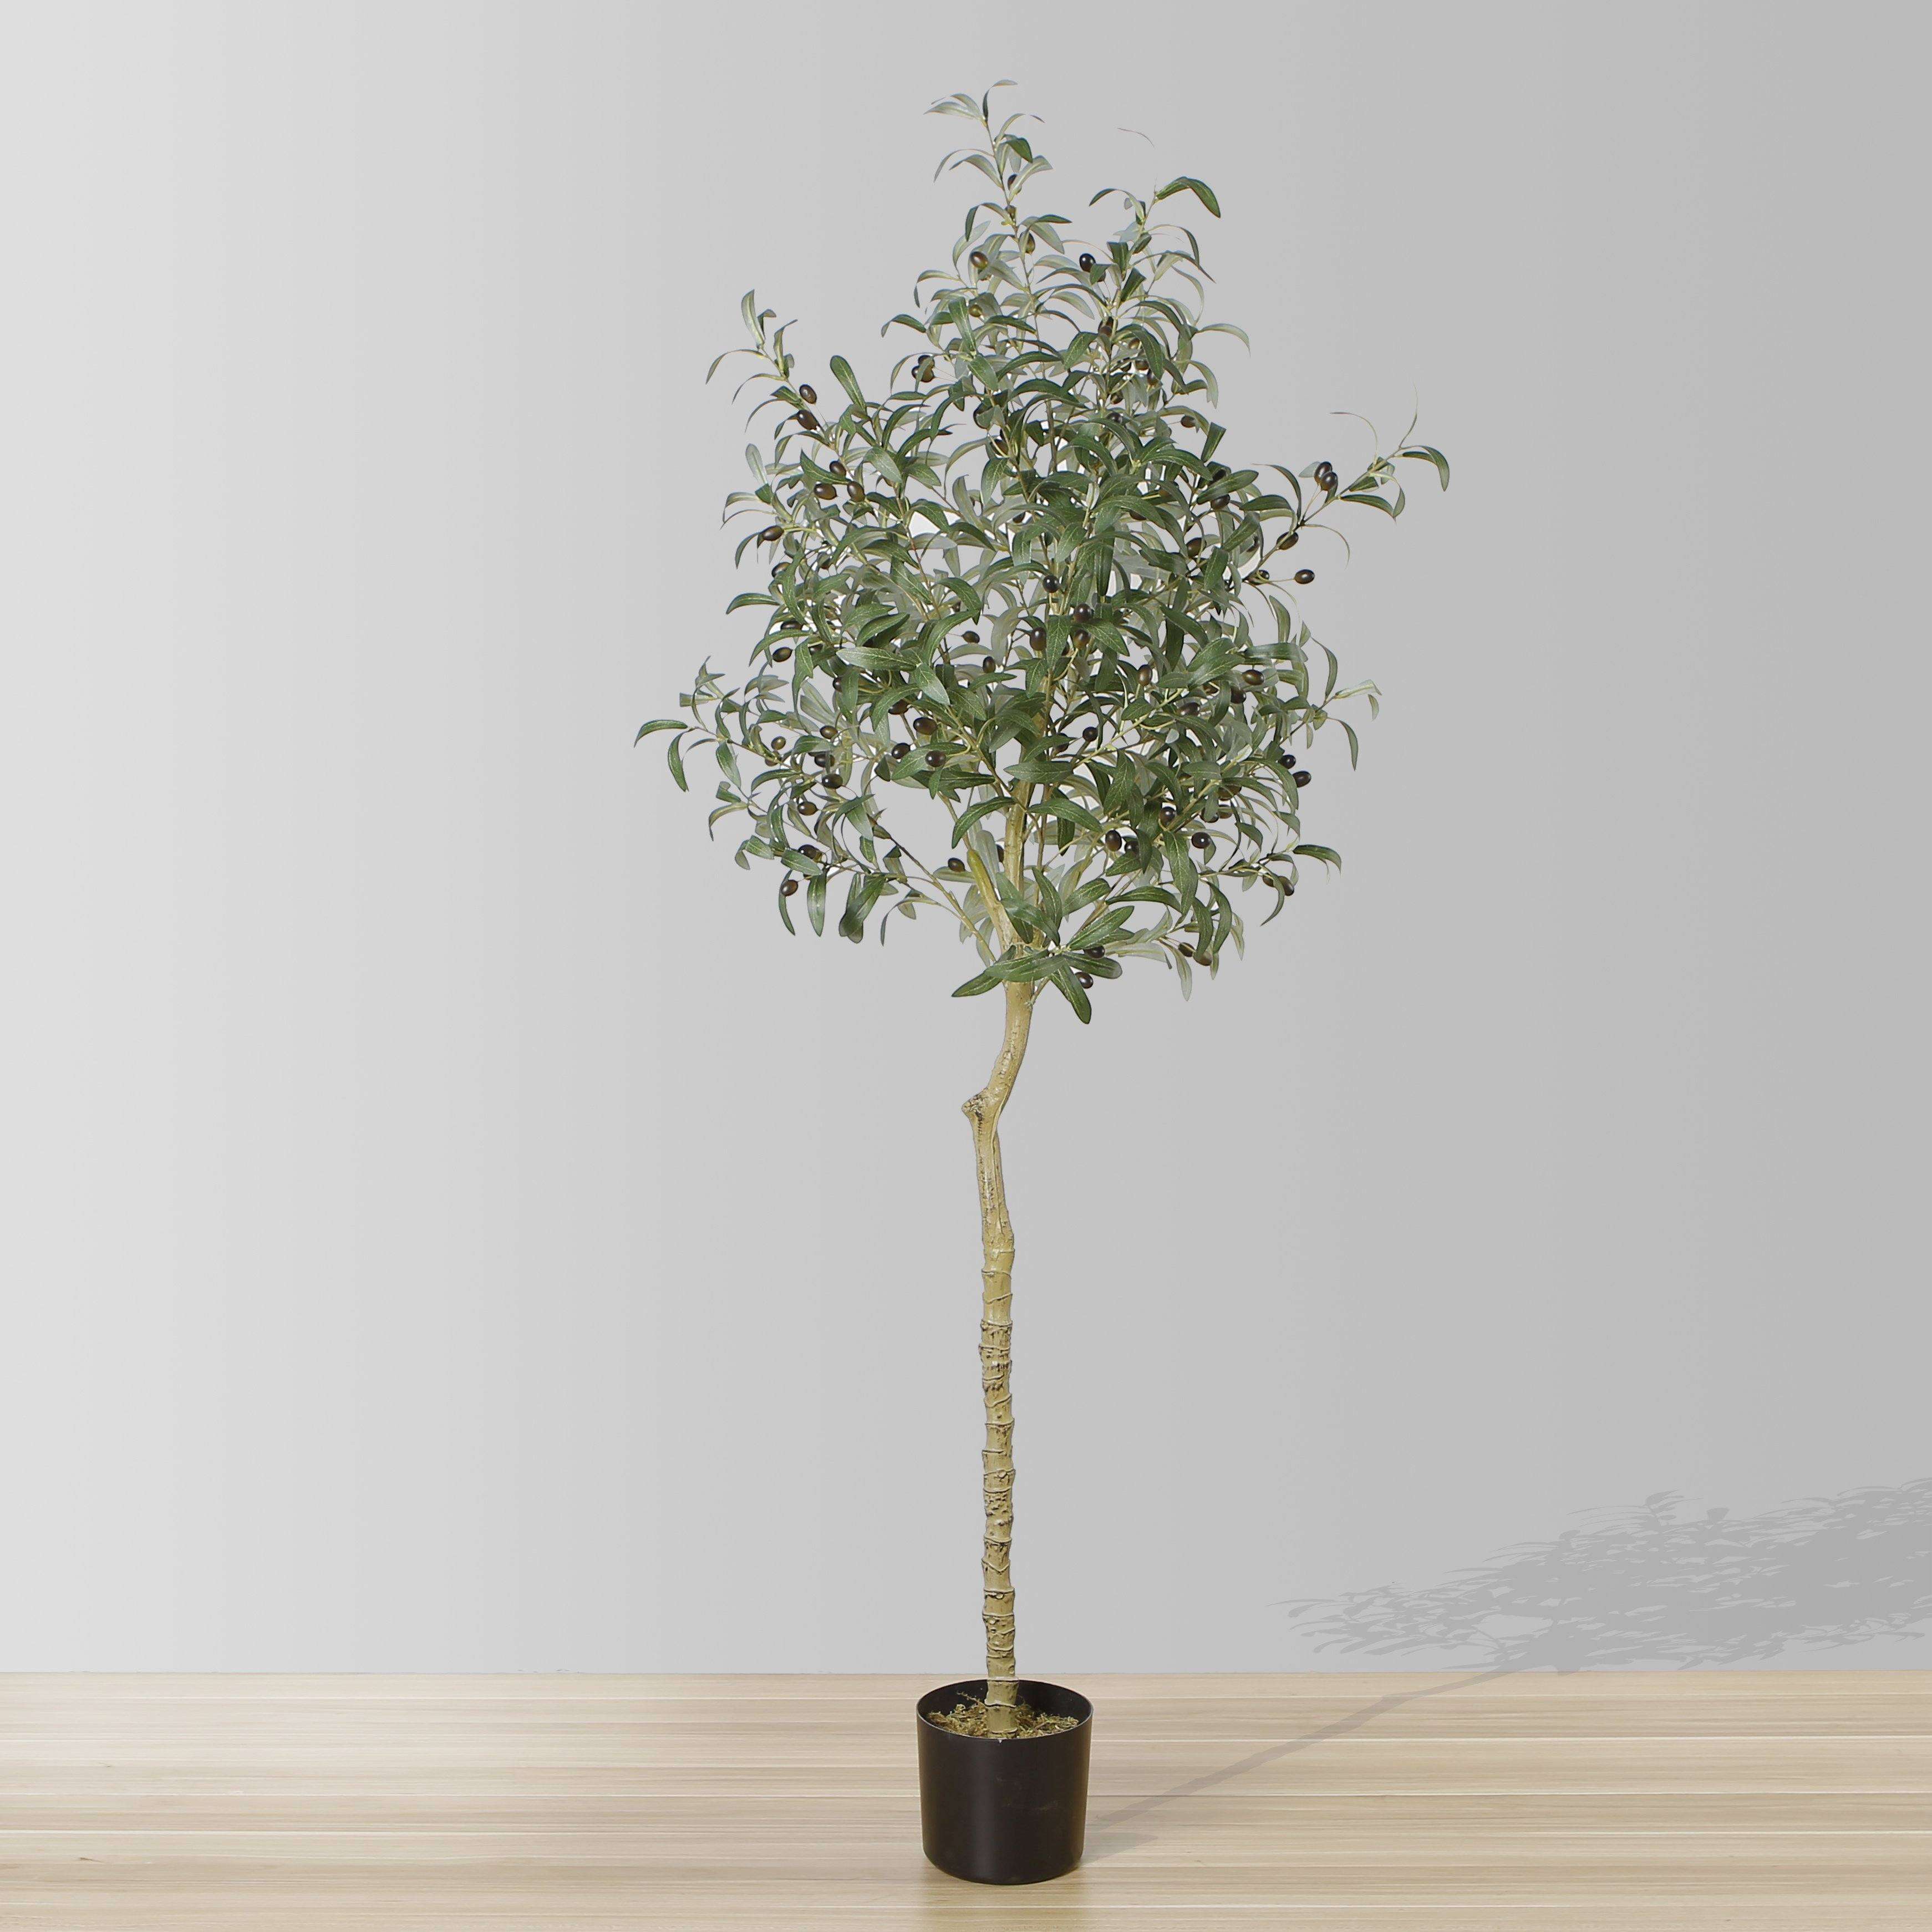 OLI Artificial Olive Tree Potted Plant